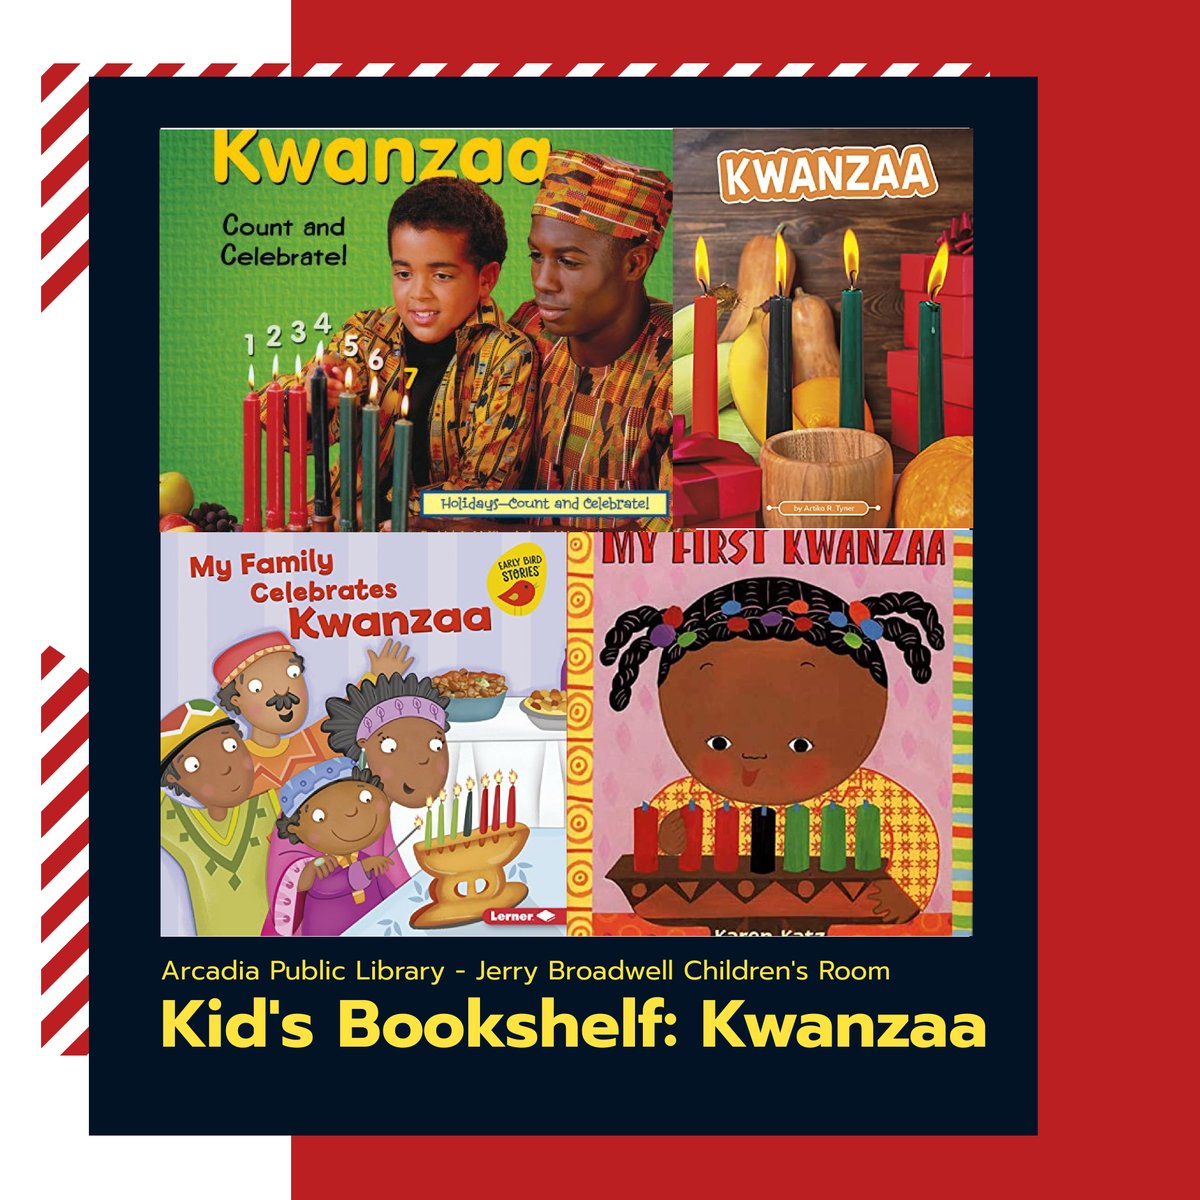 Kwanzaa is an annual celebration of African American culture from December 26 to January 1. Learn more about the holiday with these Children’s Books!  ow.ly/ZyeK50QeKwY
#Kwanzaa #childrensbooks #arcadiapubliclibrary #childrensroom